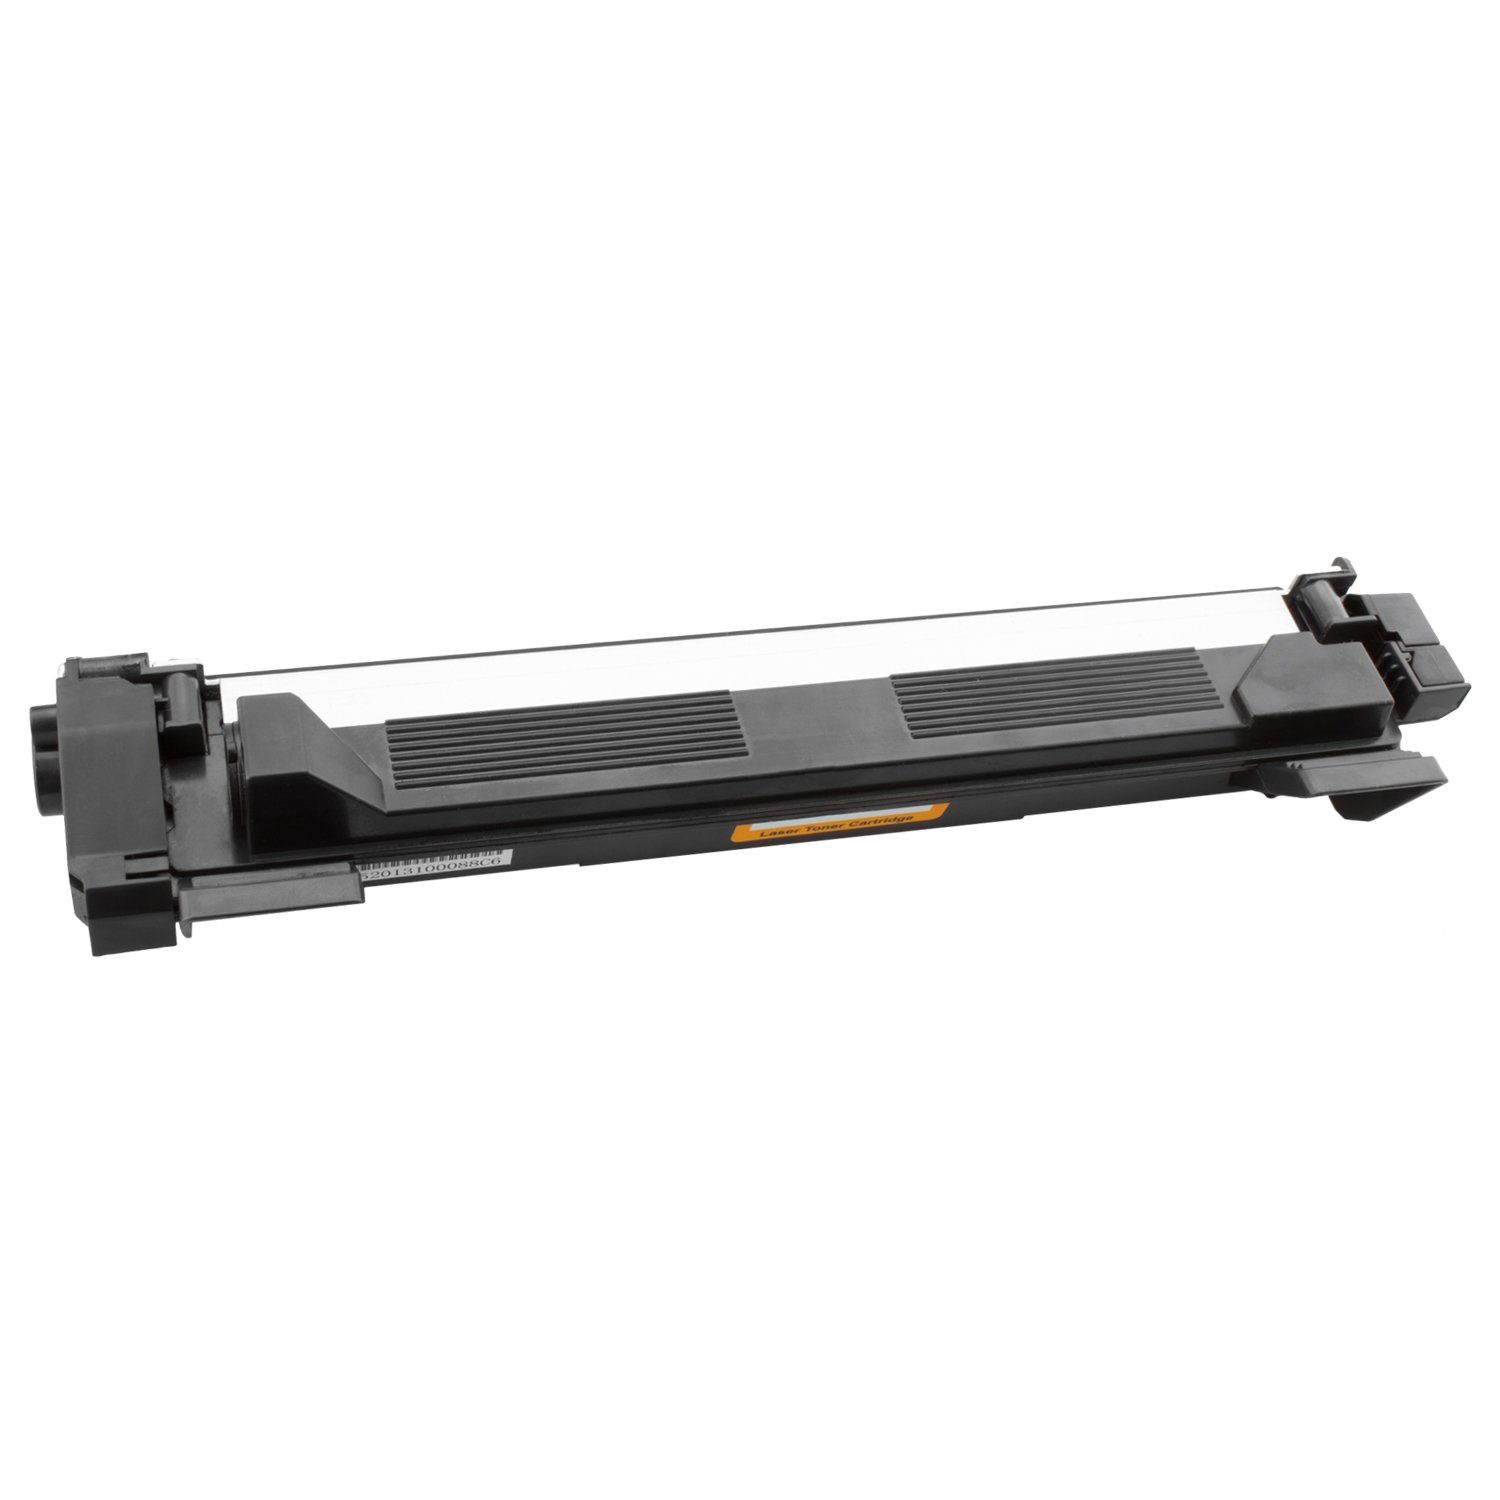 (1x Brother ersetzt Toner DCP-1610W DCP-1510 Tito-Express DCP-1612W Tonerpatrone HL-1110 MFC-1910W 1050 MFC-1810 TN TN-1050 DCP-1512 BrotherTN1050, für Brother Black),